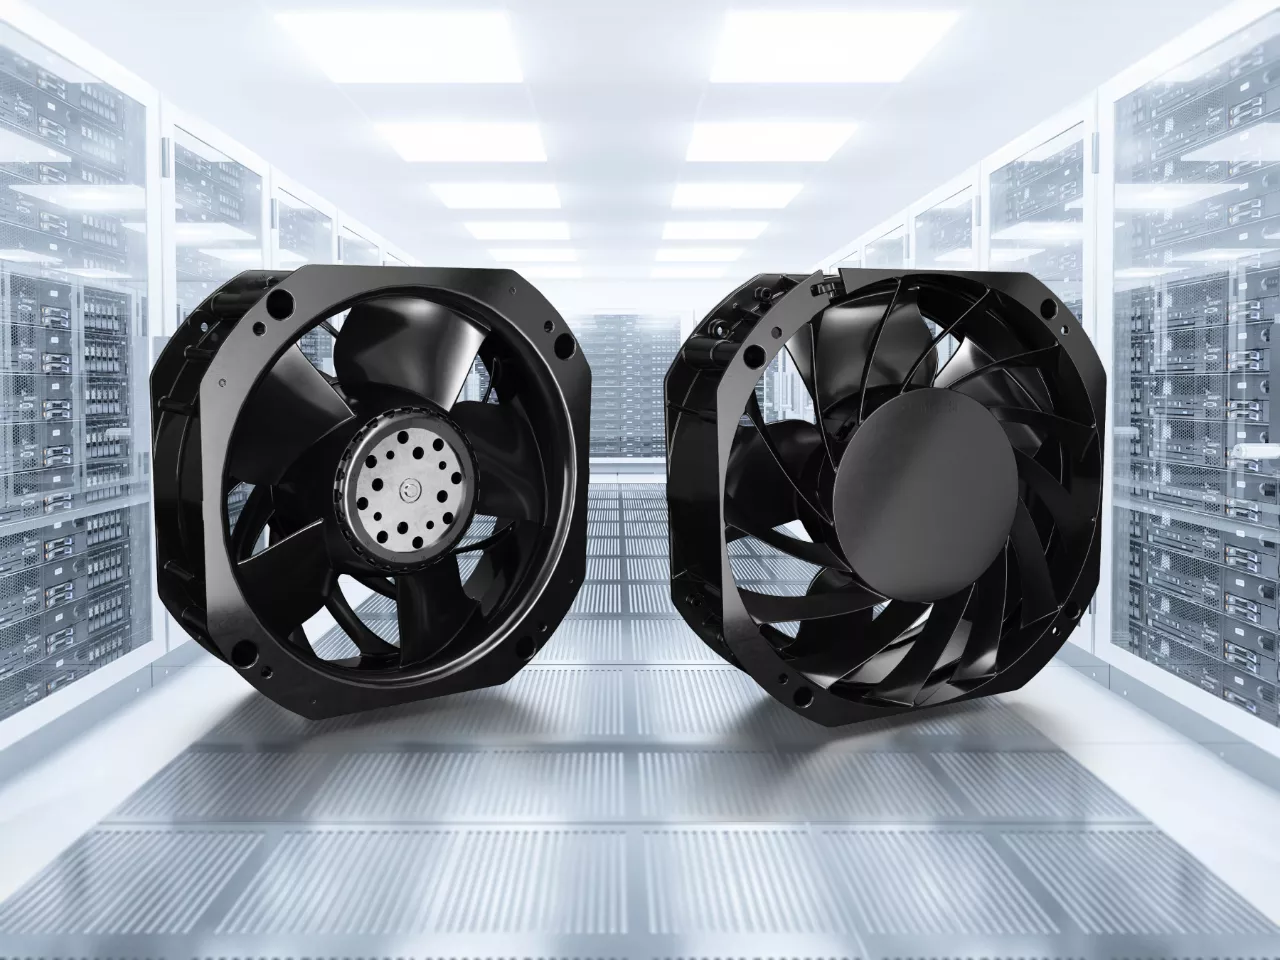 ebm papst's new high-performance AxiEco 200 compact fan